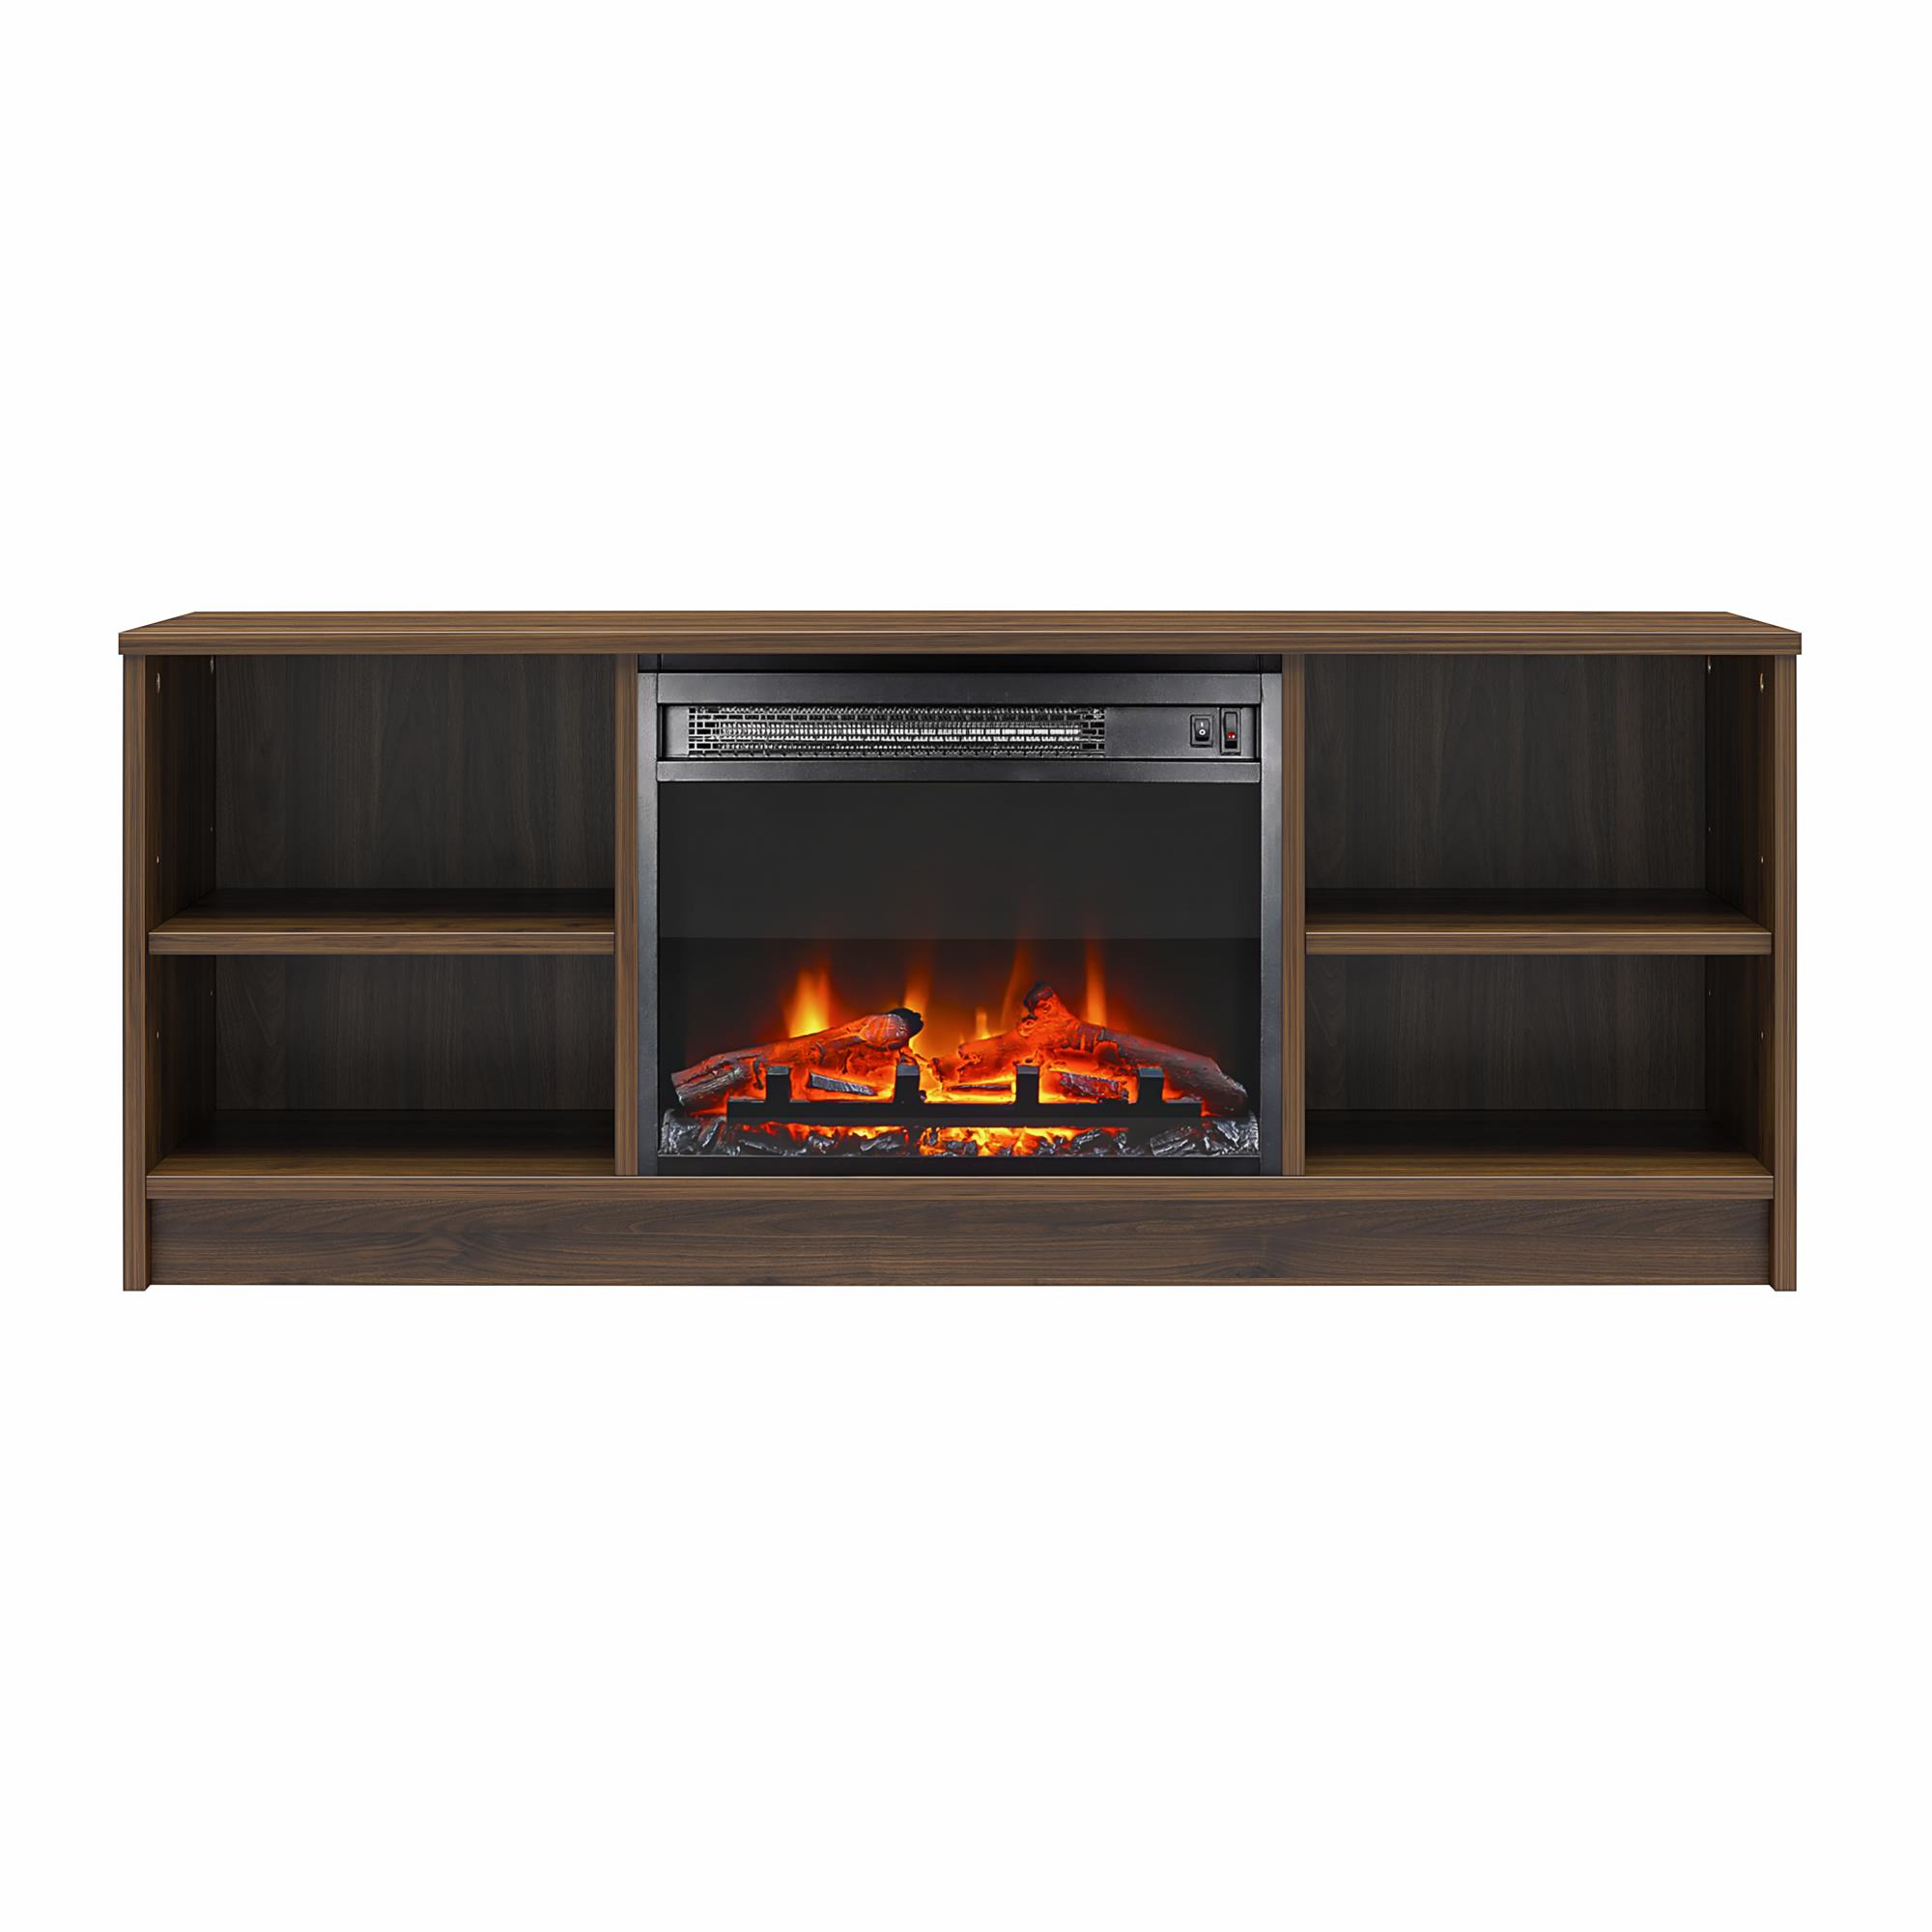 Mainstays Fireplace TV Stand, for TVs up to 55", Walnut - image 4 of 12